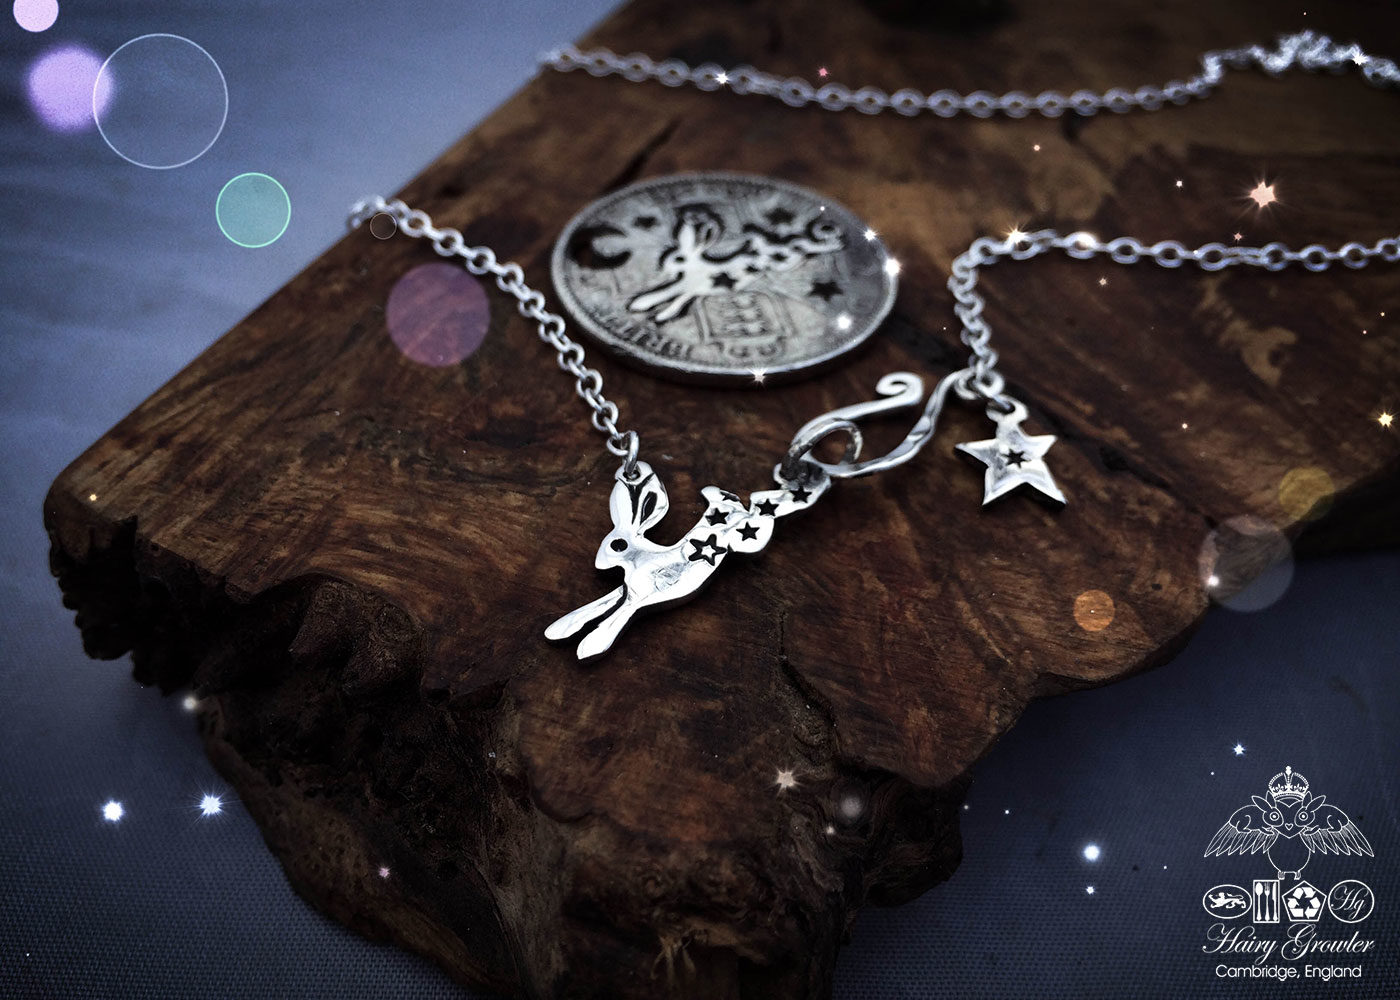 little leaping star hare necklace individually handmade and recycled from an old Victorian silver coins